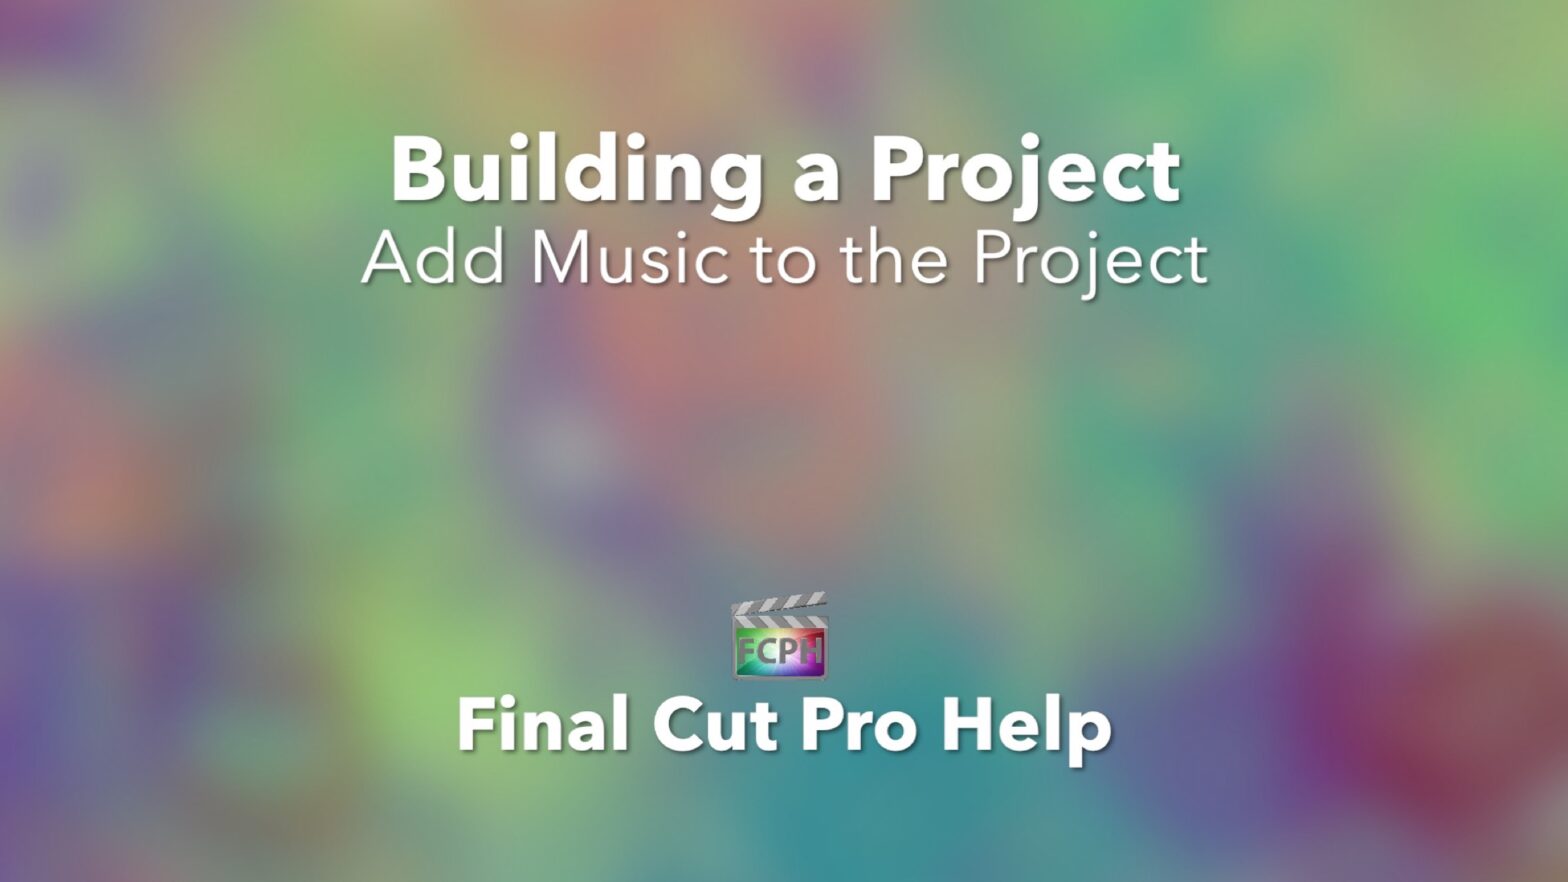 Add Music to the Project